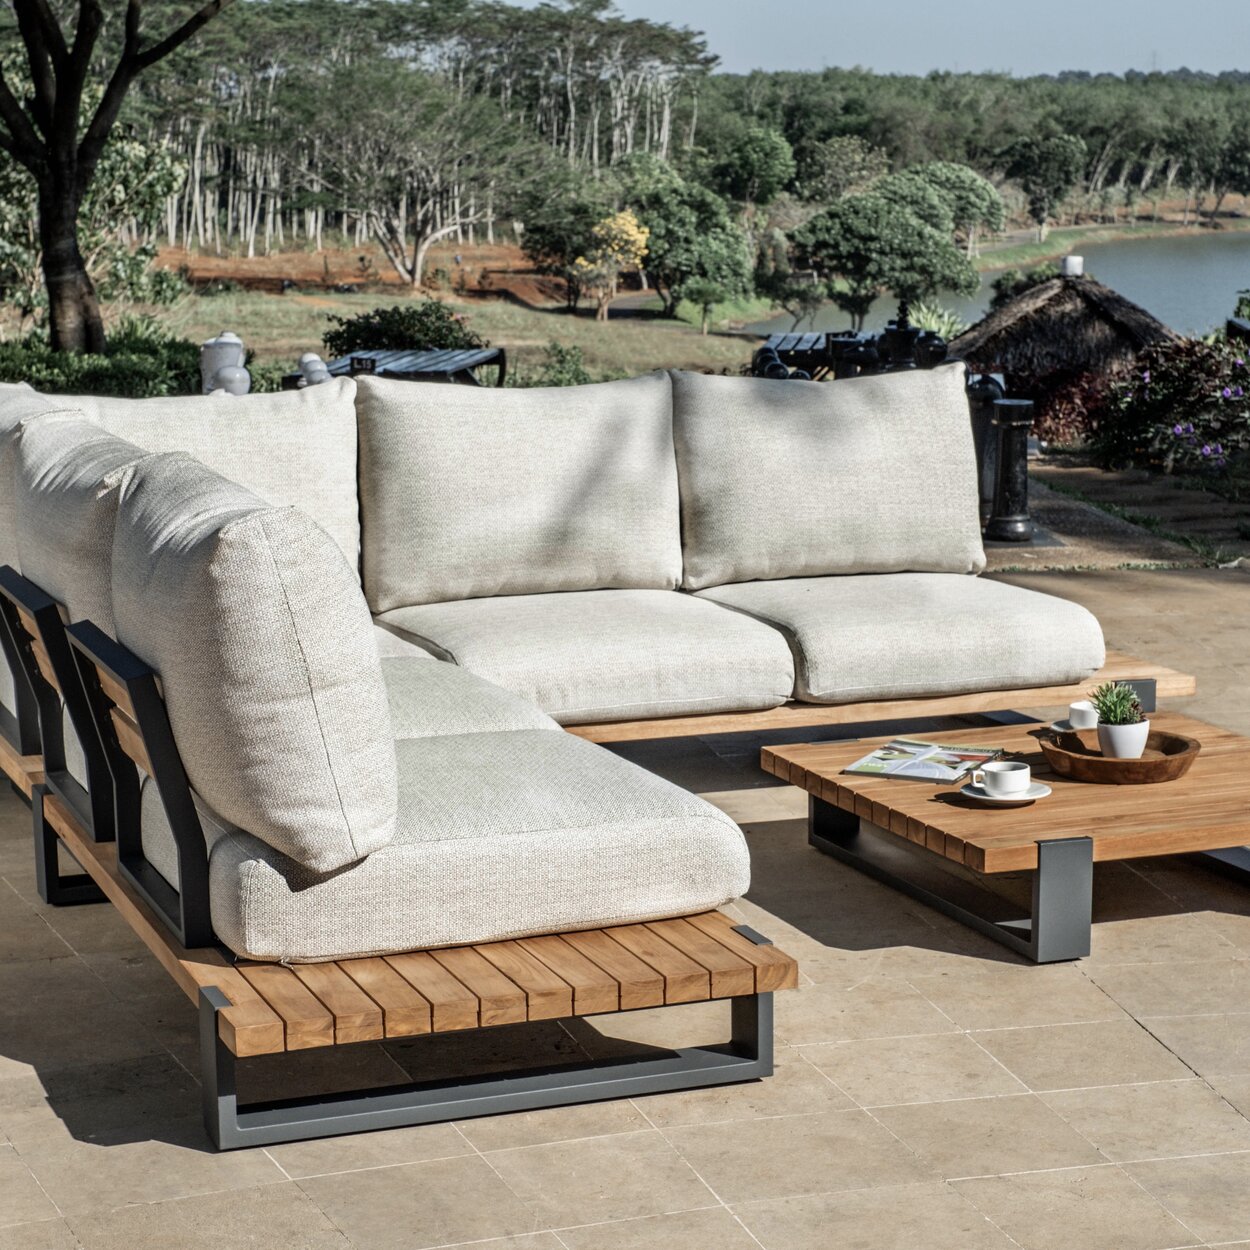 Outdoor lounge made in durable aluminium and FSC teak